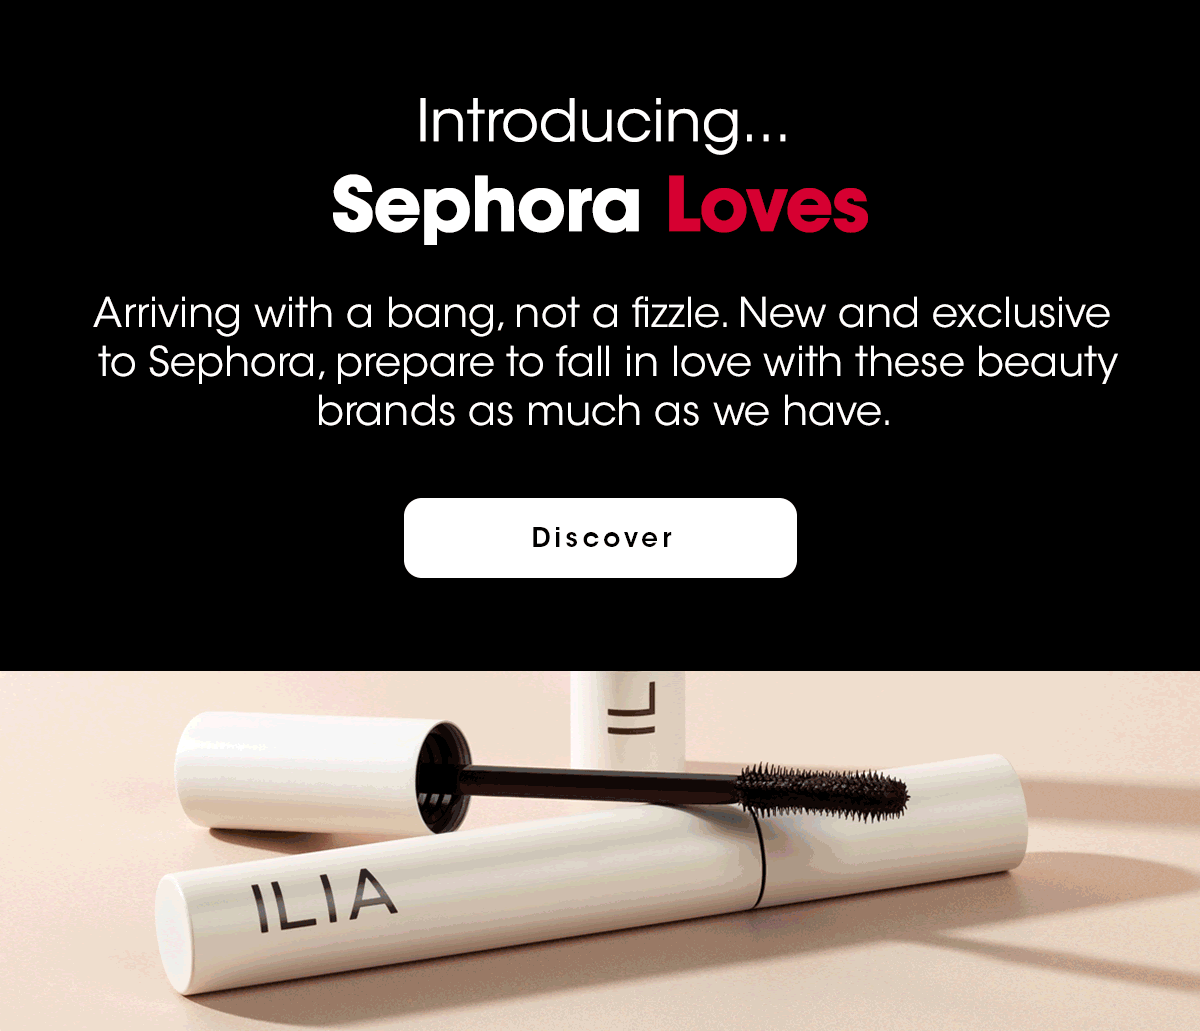 Introducing NEW Sephora brands, email sent out